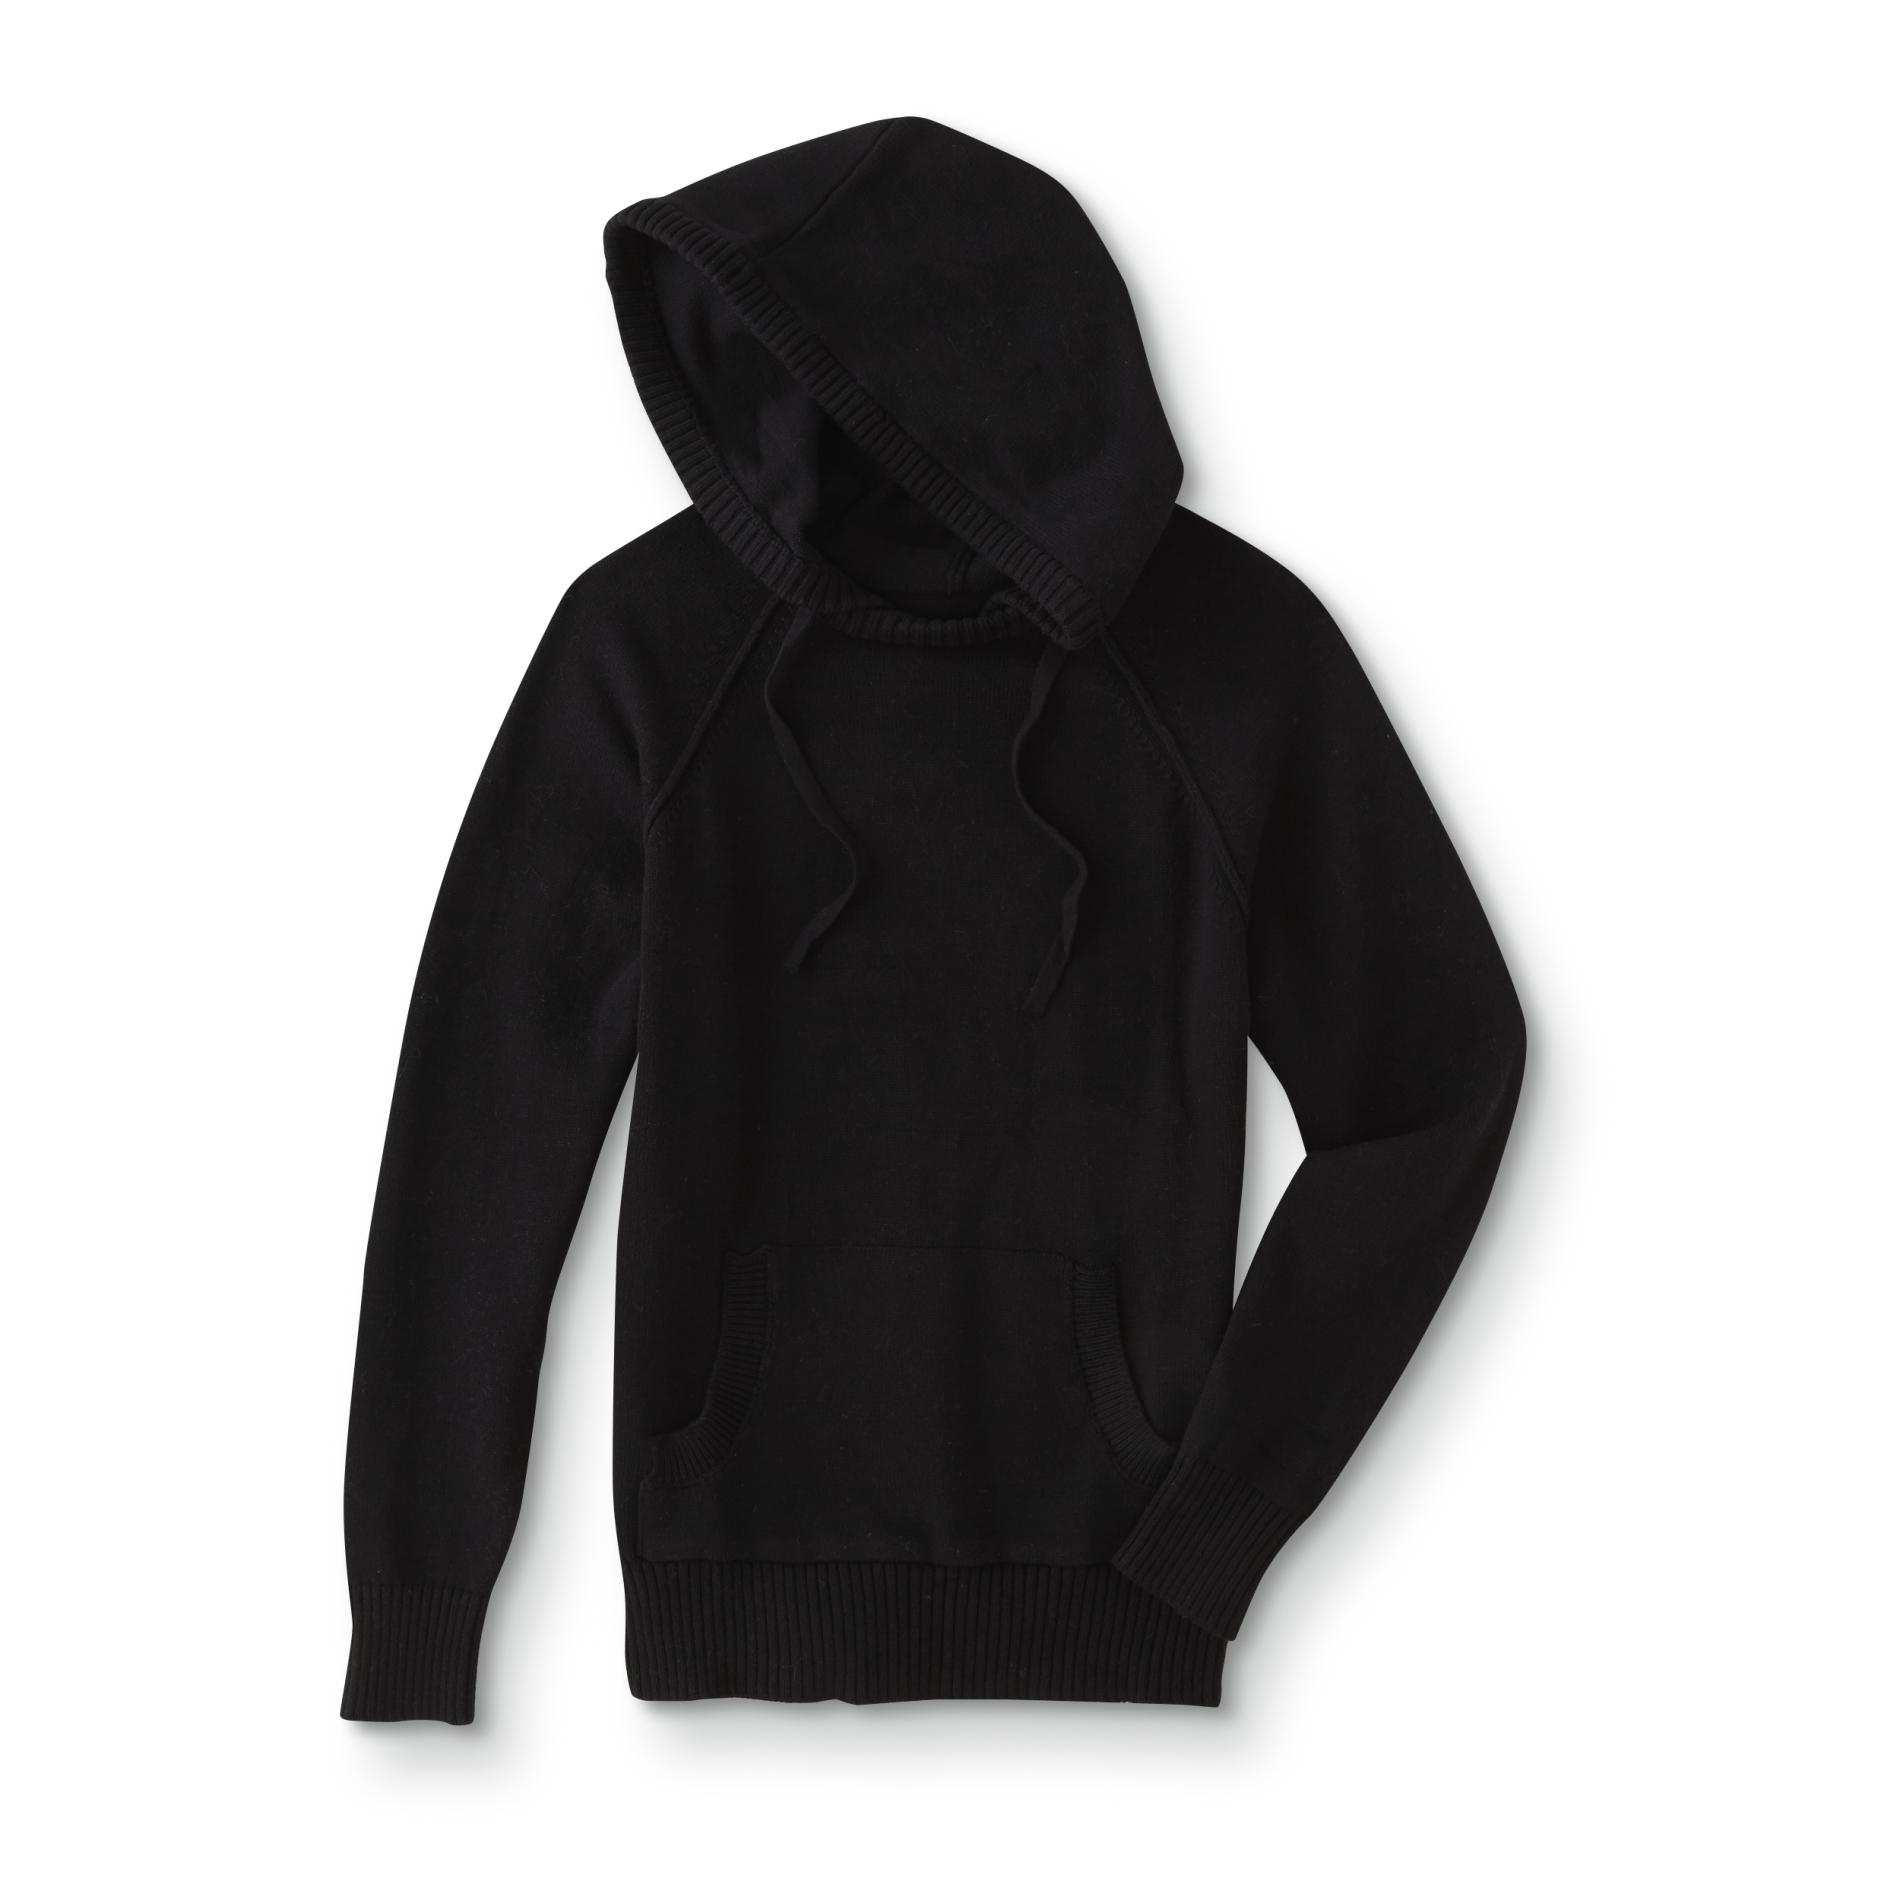 Amplify Young Men's Hooded Sweater